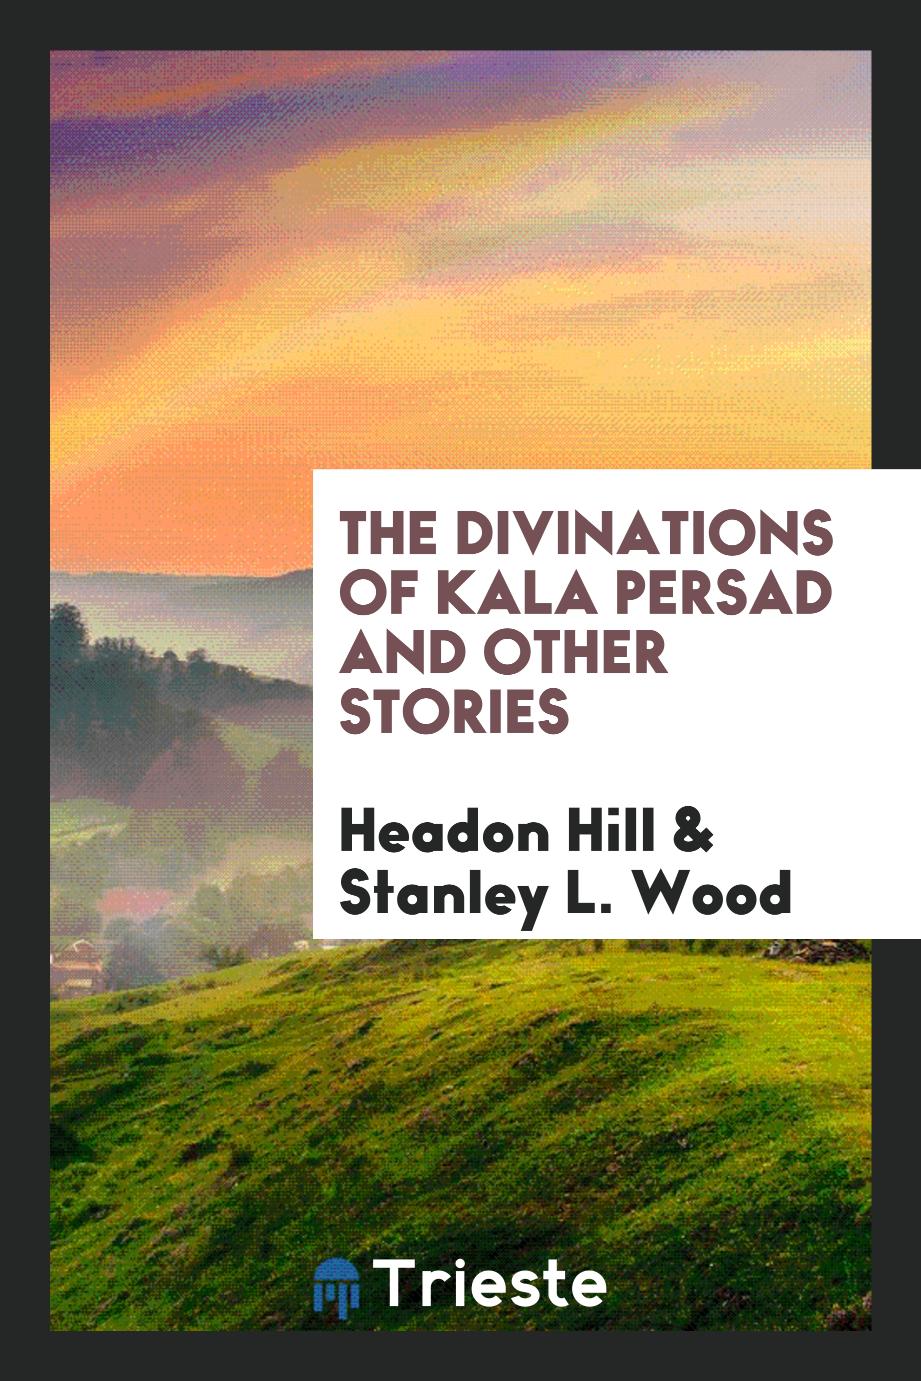 Headon Hill, Stanley L. Wood - The Divinations of Kala Persad and Other Stories